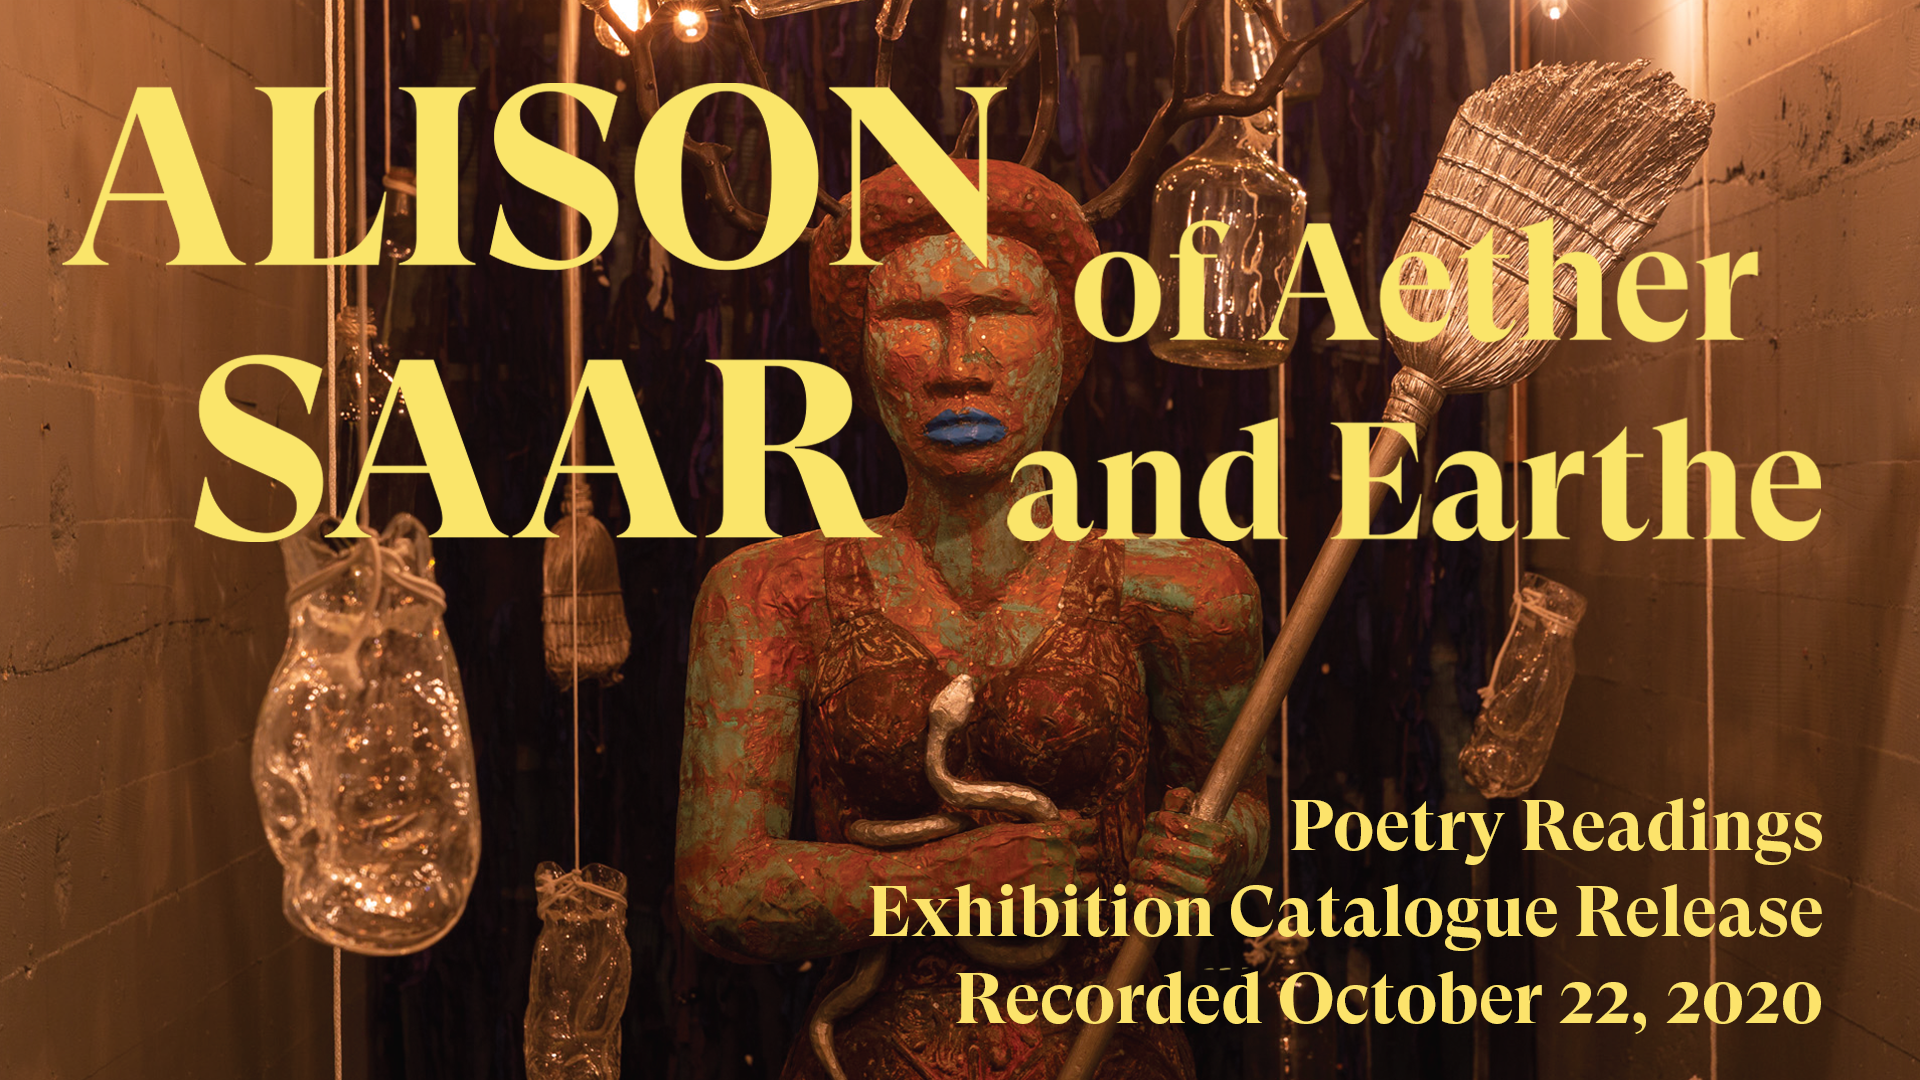 WATCH: Poetry Readings from the Alison Saar Exhibition Catalogue